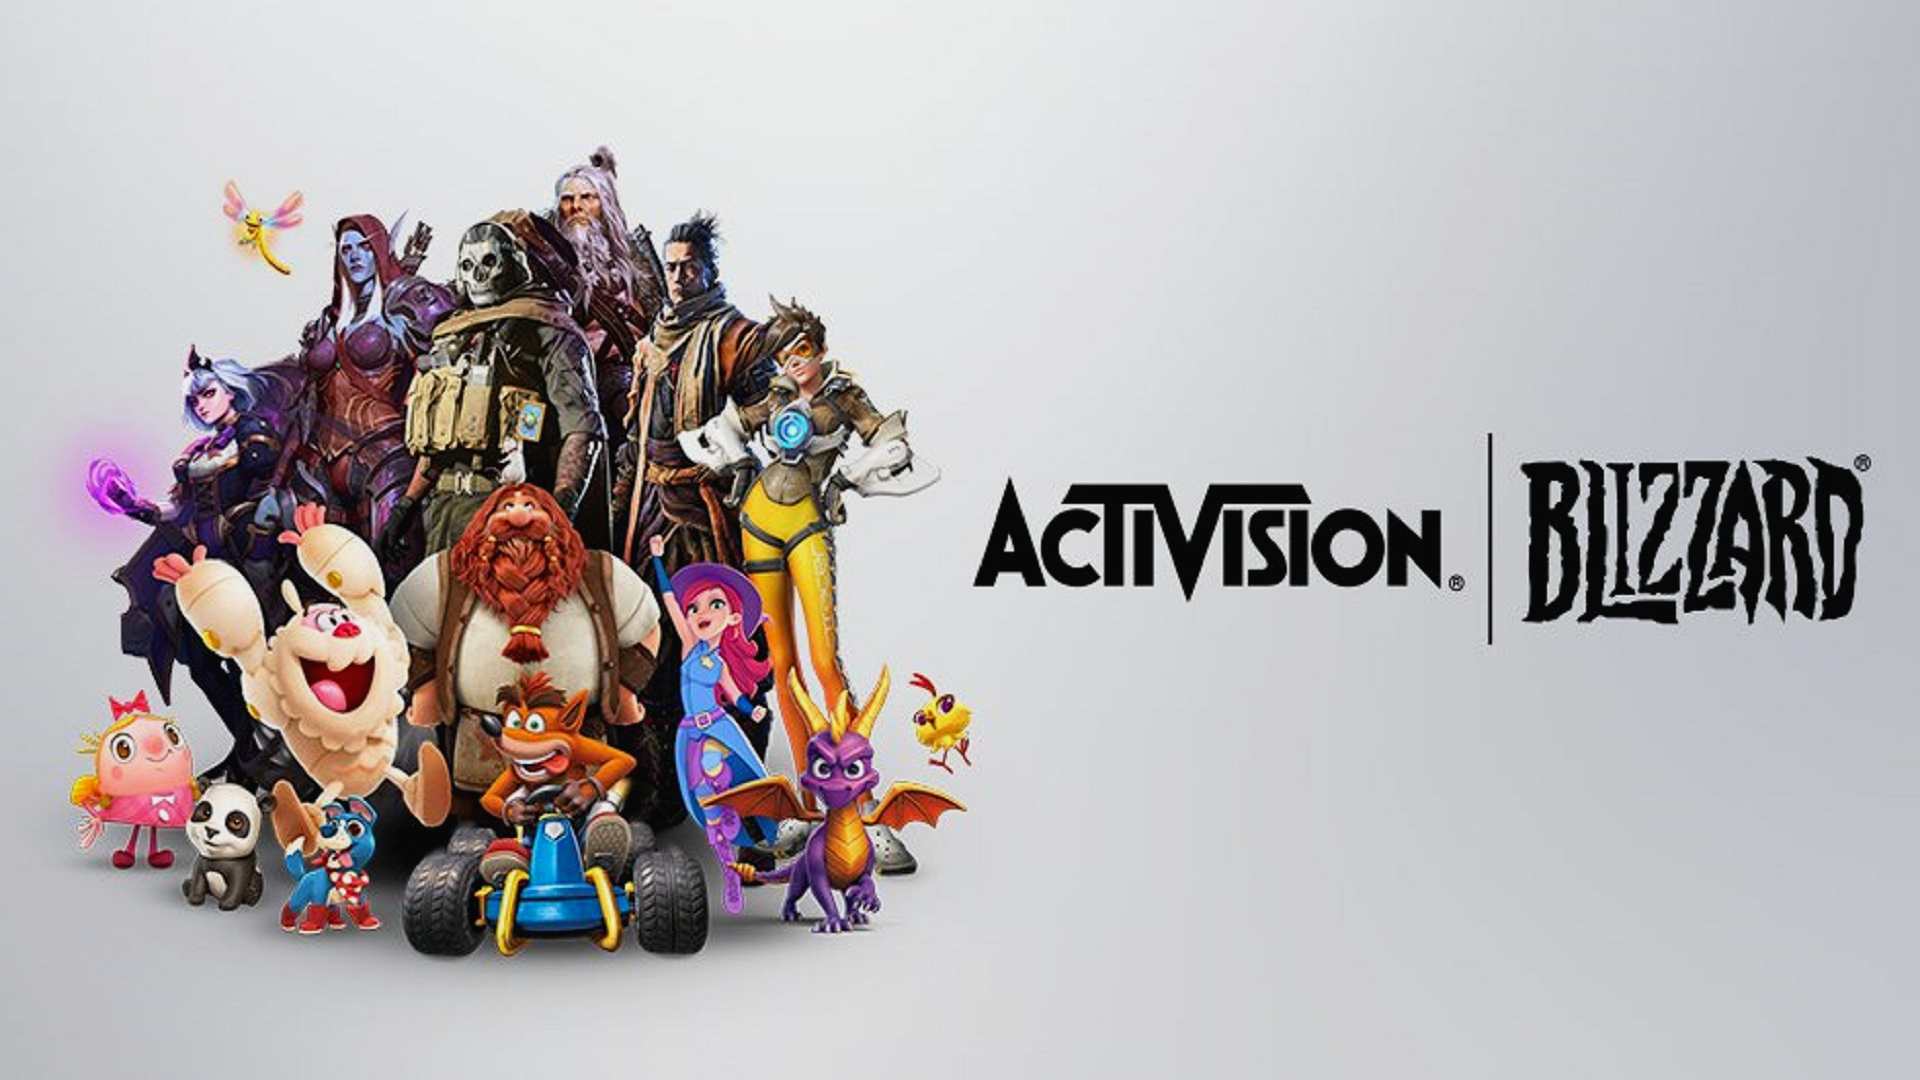 The Microsoft Activision integration will bring the catalog of games to a wider audience.